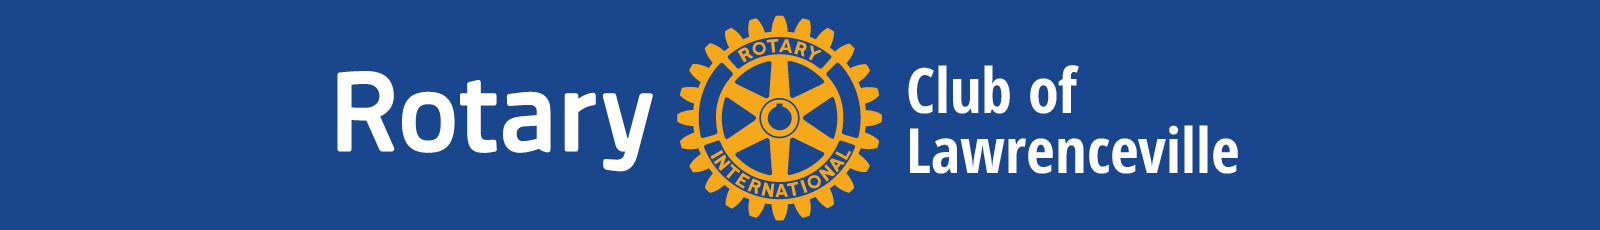 cropped-2014_Rotary_WebsiteHeader2.jpg | Rotary Club of Lawrenceville